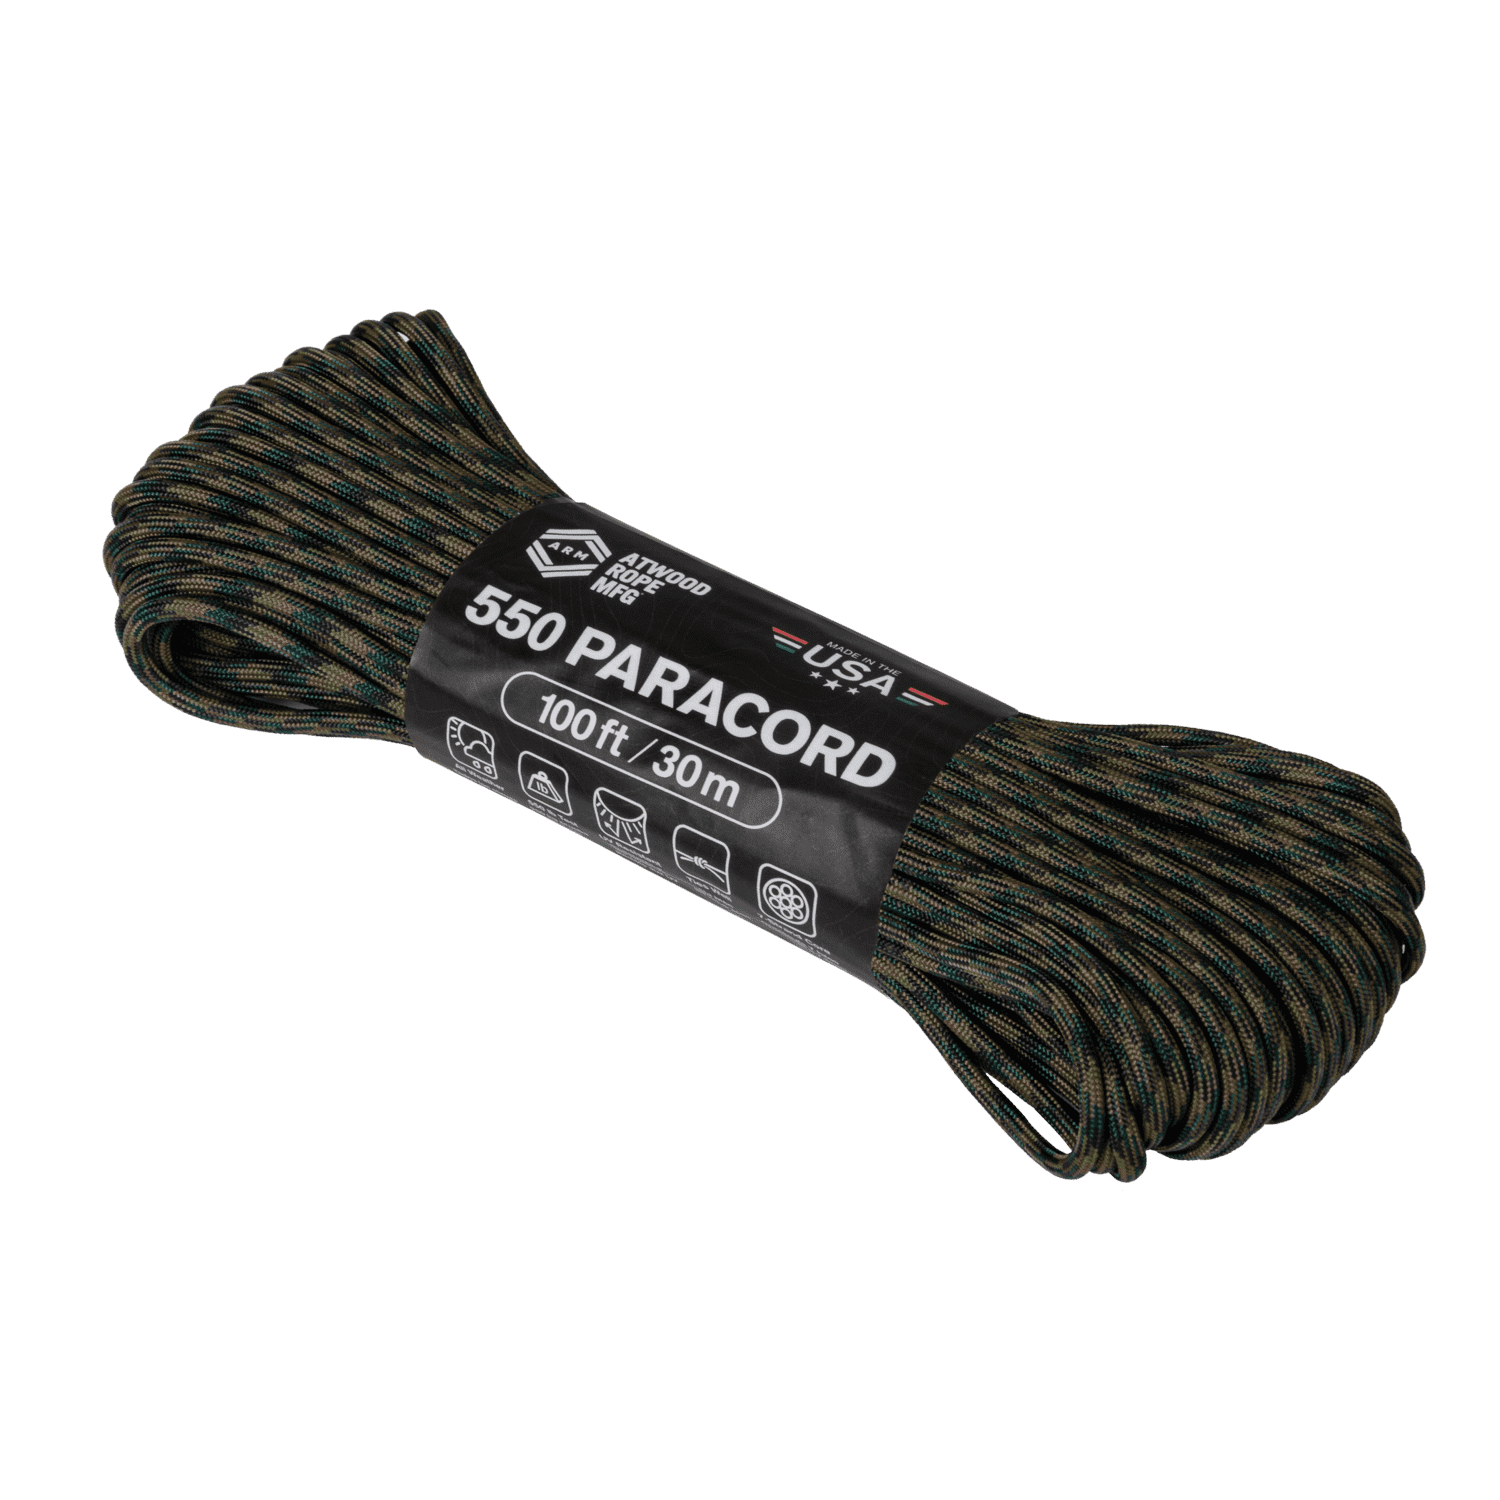 Atwood Rope -  550 PARACORD 4 MM 30M - Paracord Kötél (US Woodland)